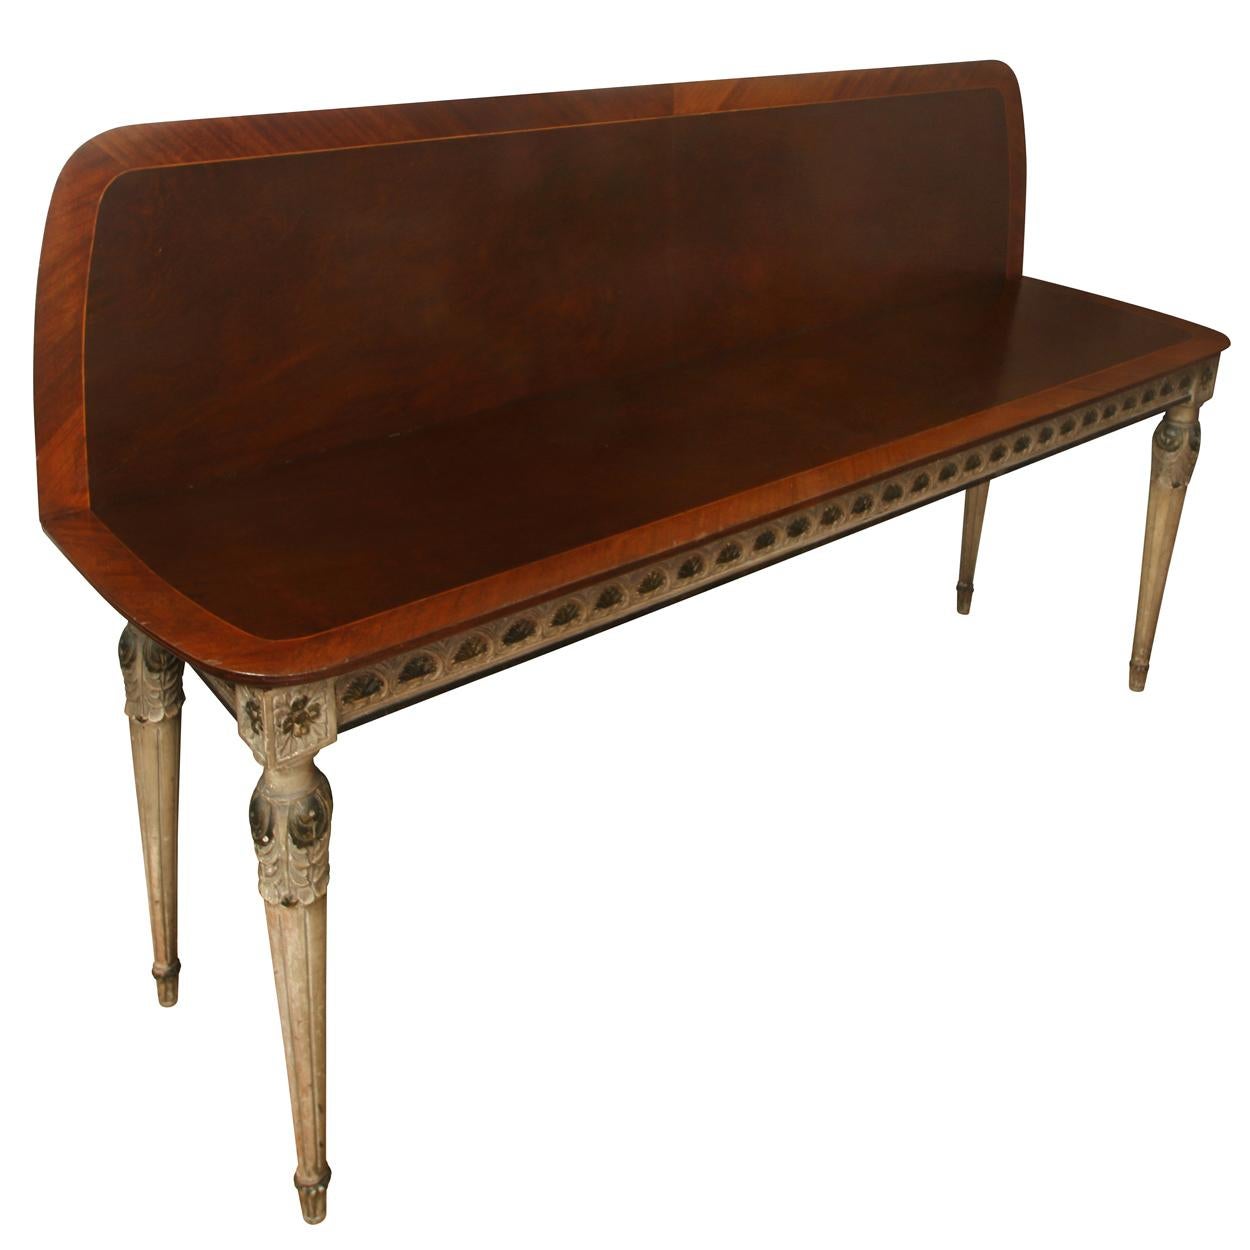 A metamorphic Neoclassical style console table with carved and painted detail. Dark wood top has a banded inlay border with a lighter color wood and intricate motif at each corner. Painted apron and legs feature carved design with rounded and fluted